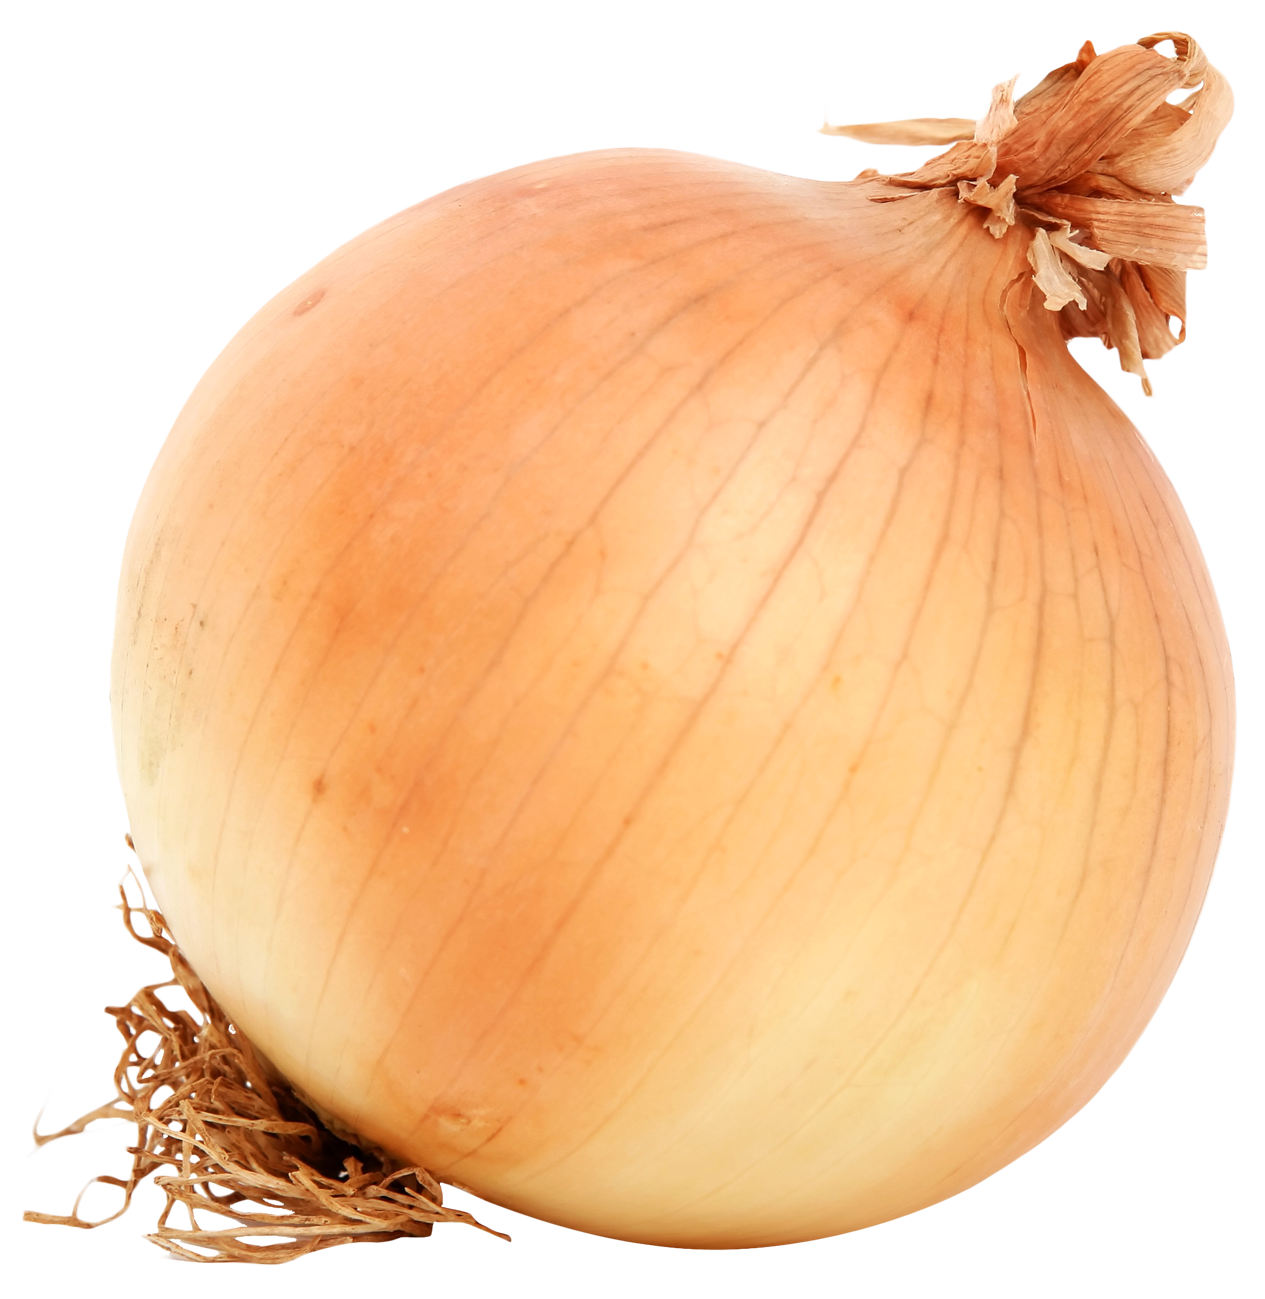 Red Onion PNG Clipart